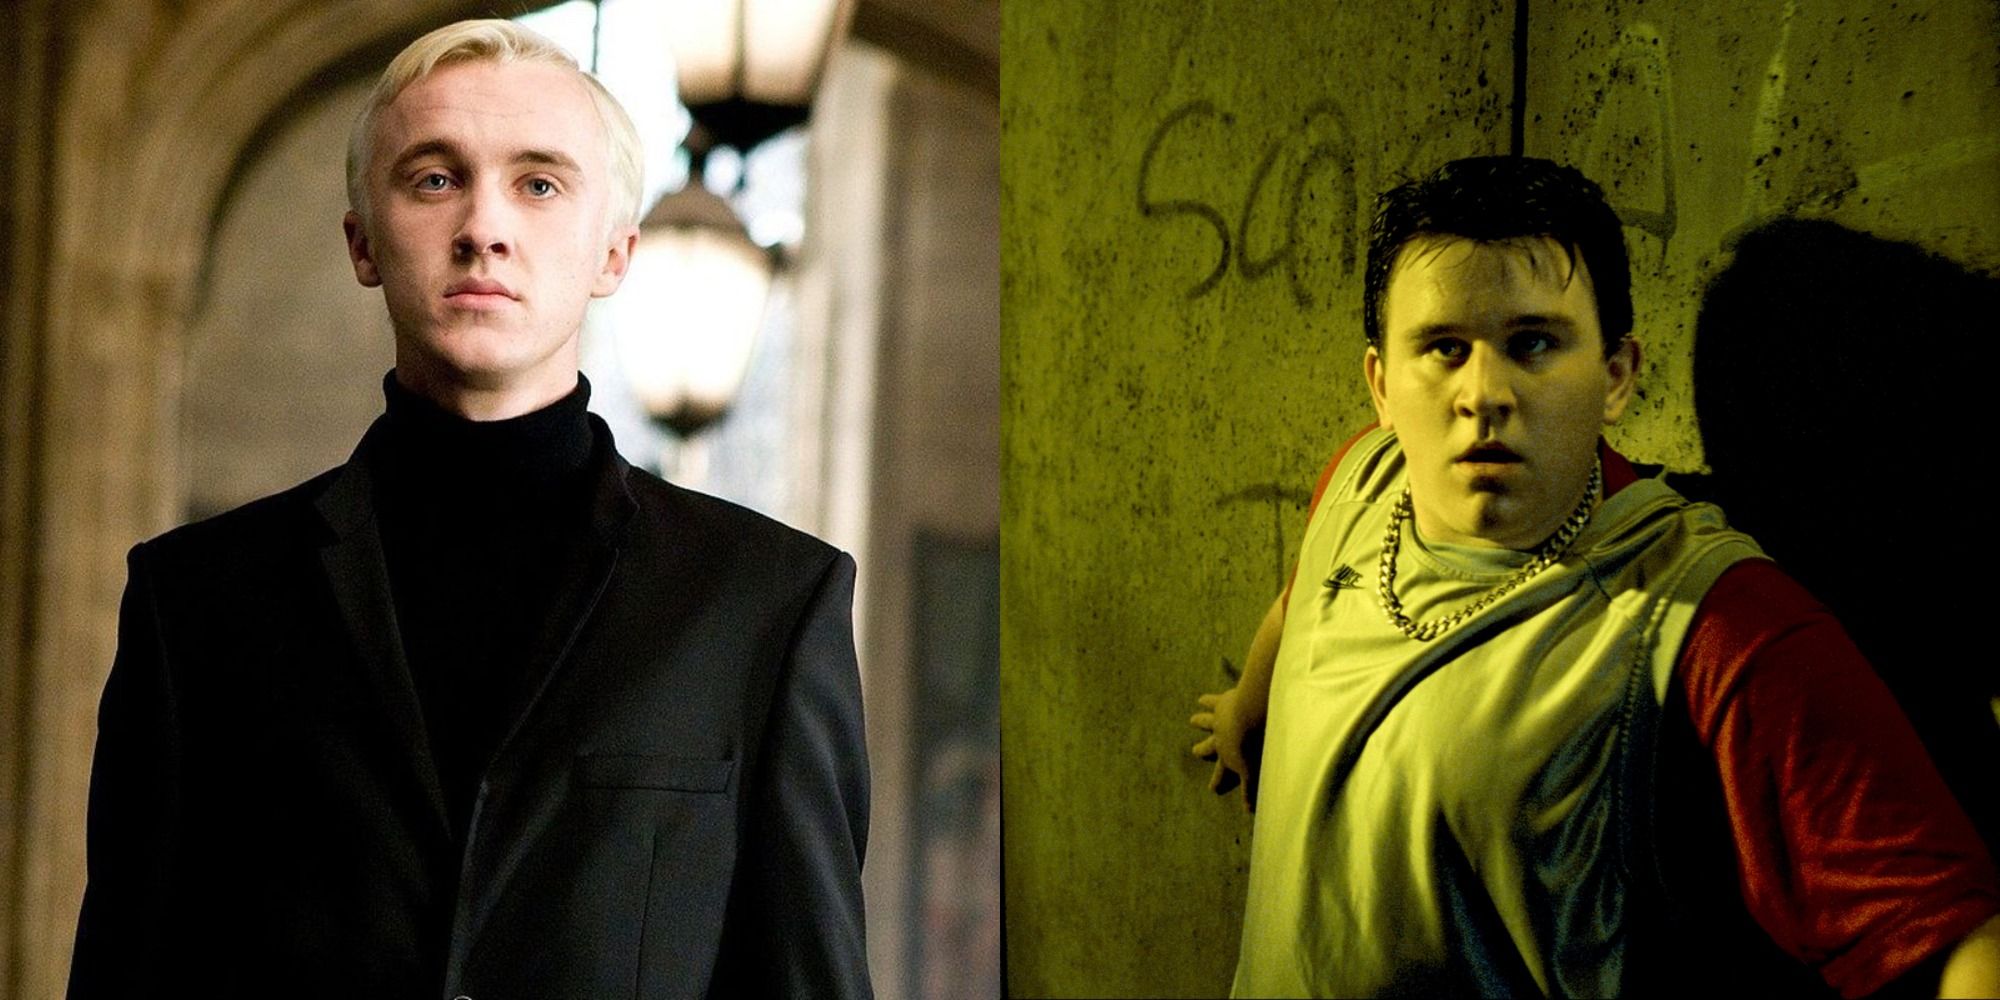 A split image of Draco Malfoy in a black suit and Dudley Dursley in an alleyway from Harry Potter